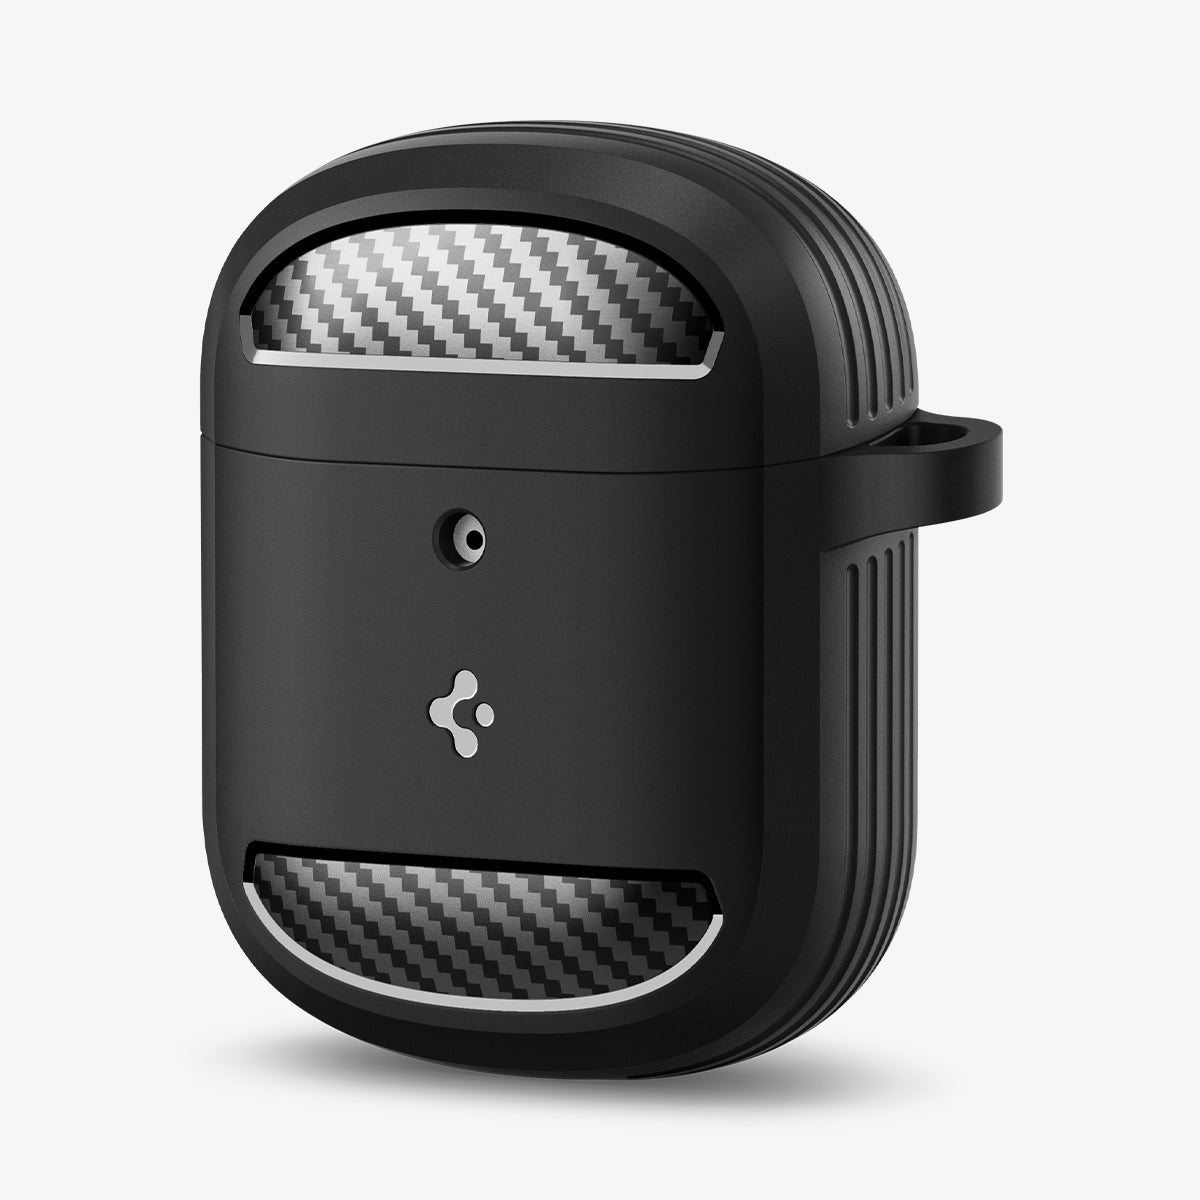 ACS05133 - Pixel Buds Pro Case Rugged Armor in matte black showing the front and partial side